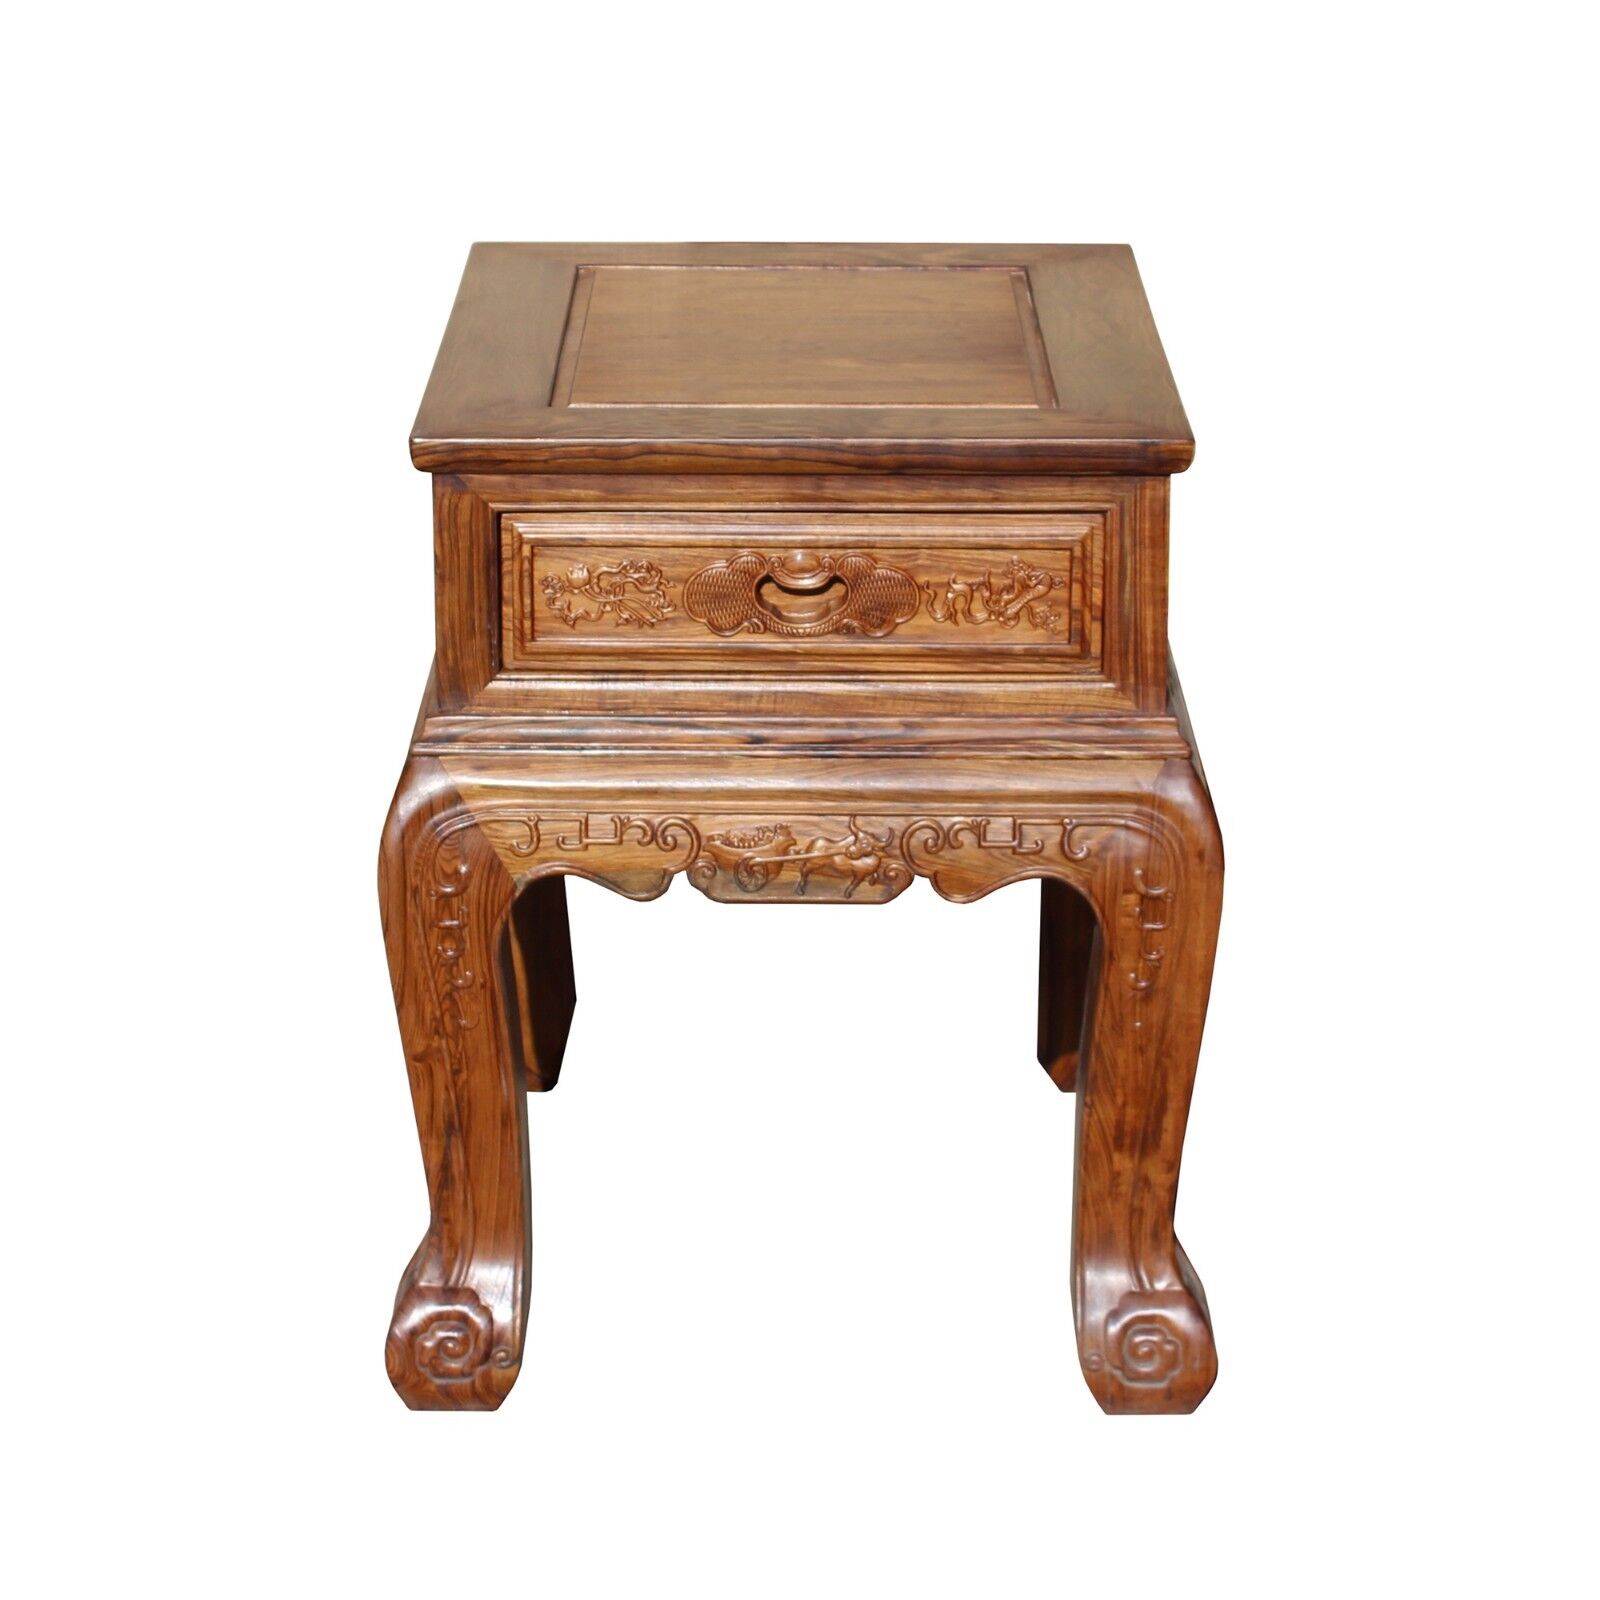 Chinese Oriental Huali Rosewood Flower Motif Tea Table Stand cs4596 Handmade Does Not Apply